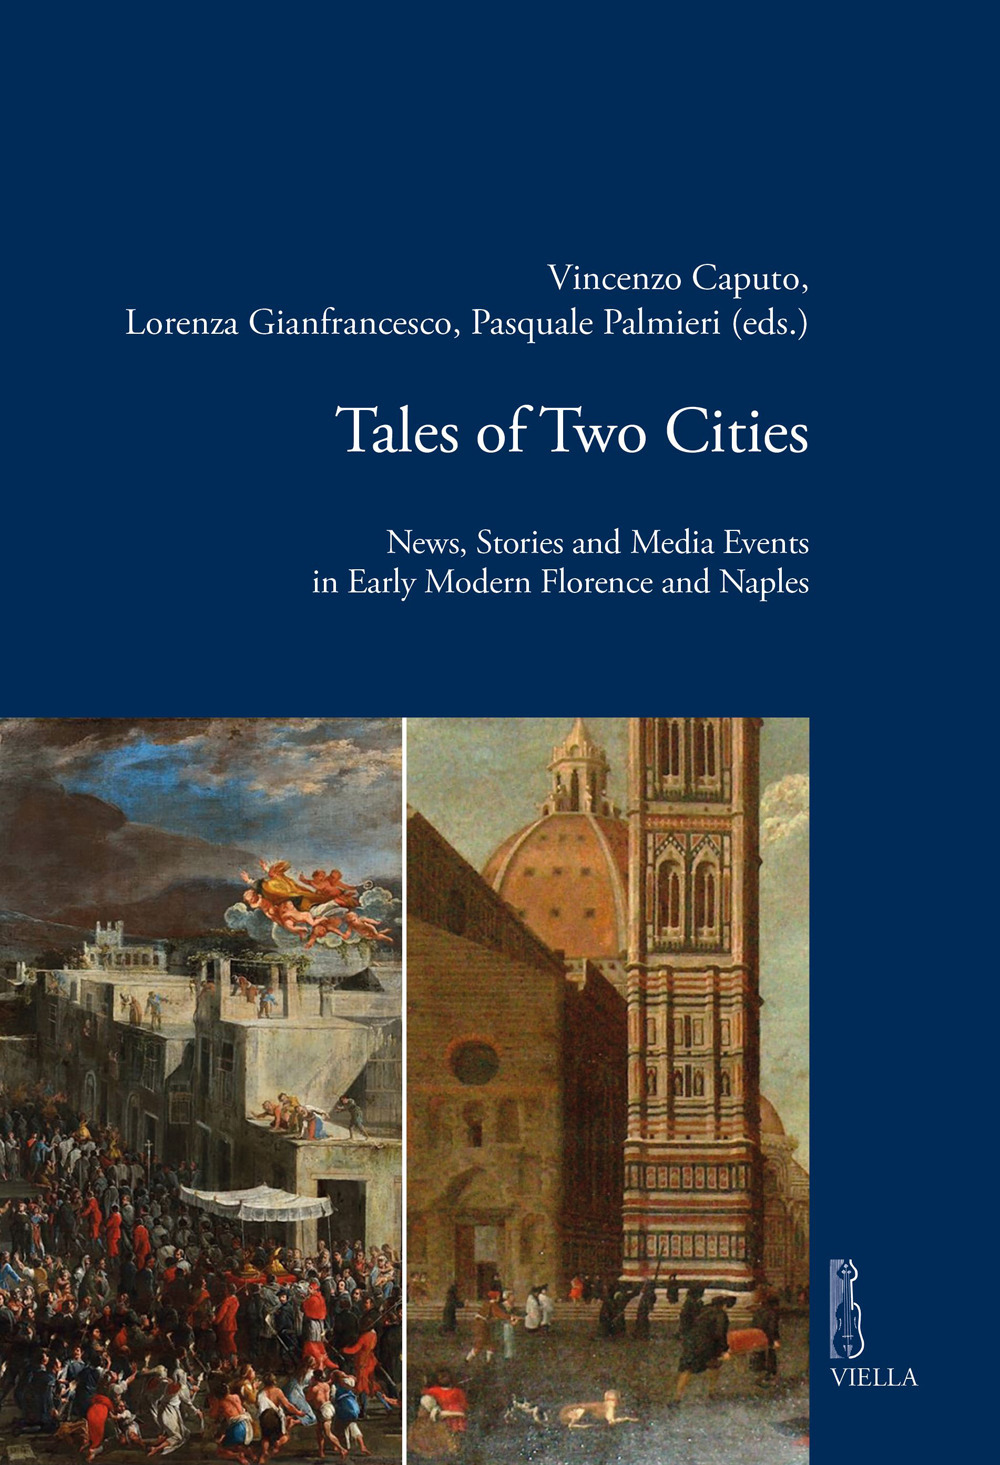 Tales of two cities. News, stories and media events in early modern Florence and Naples